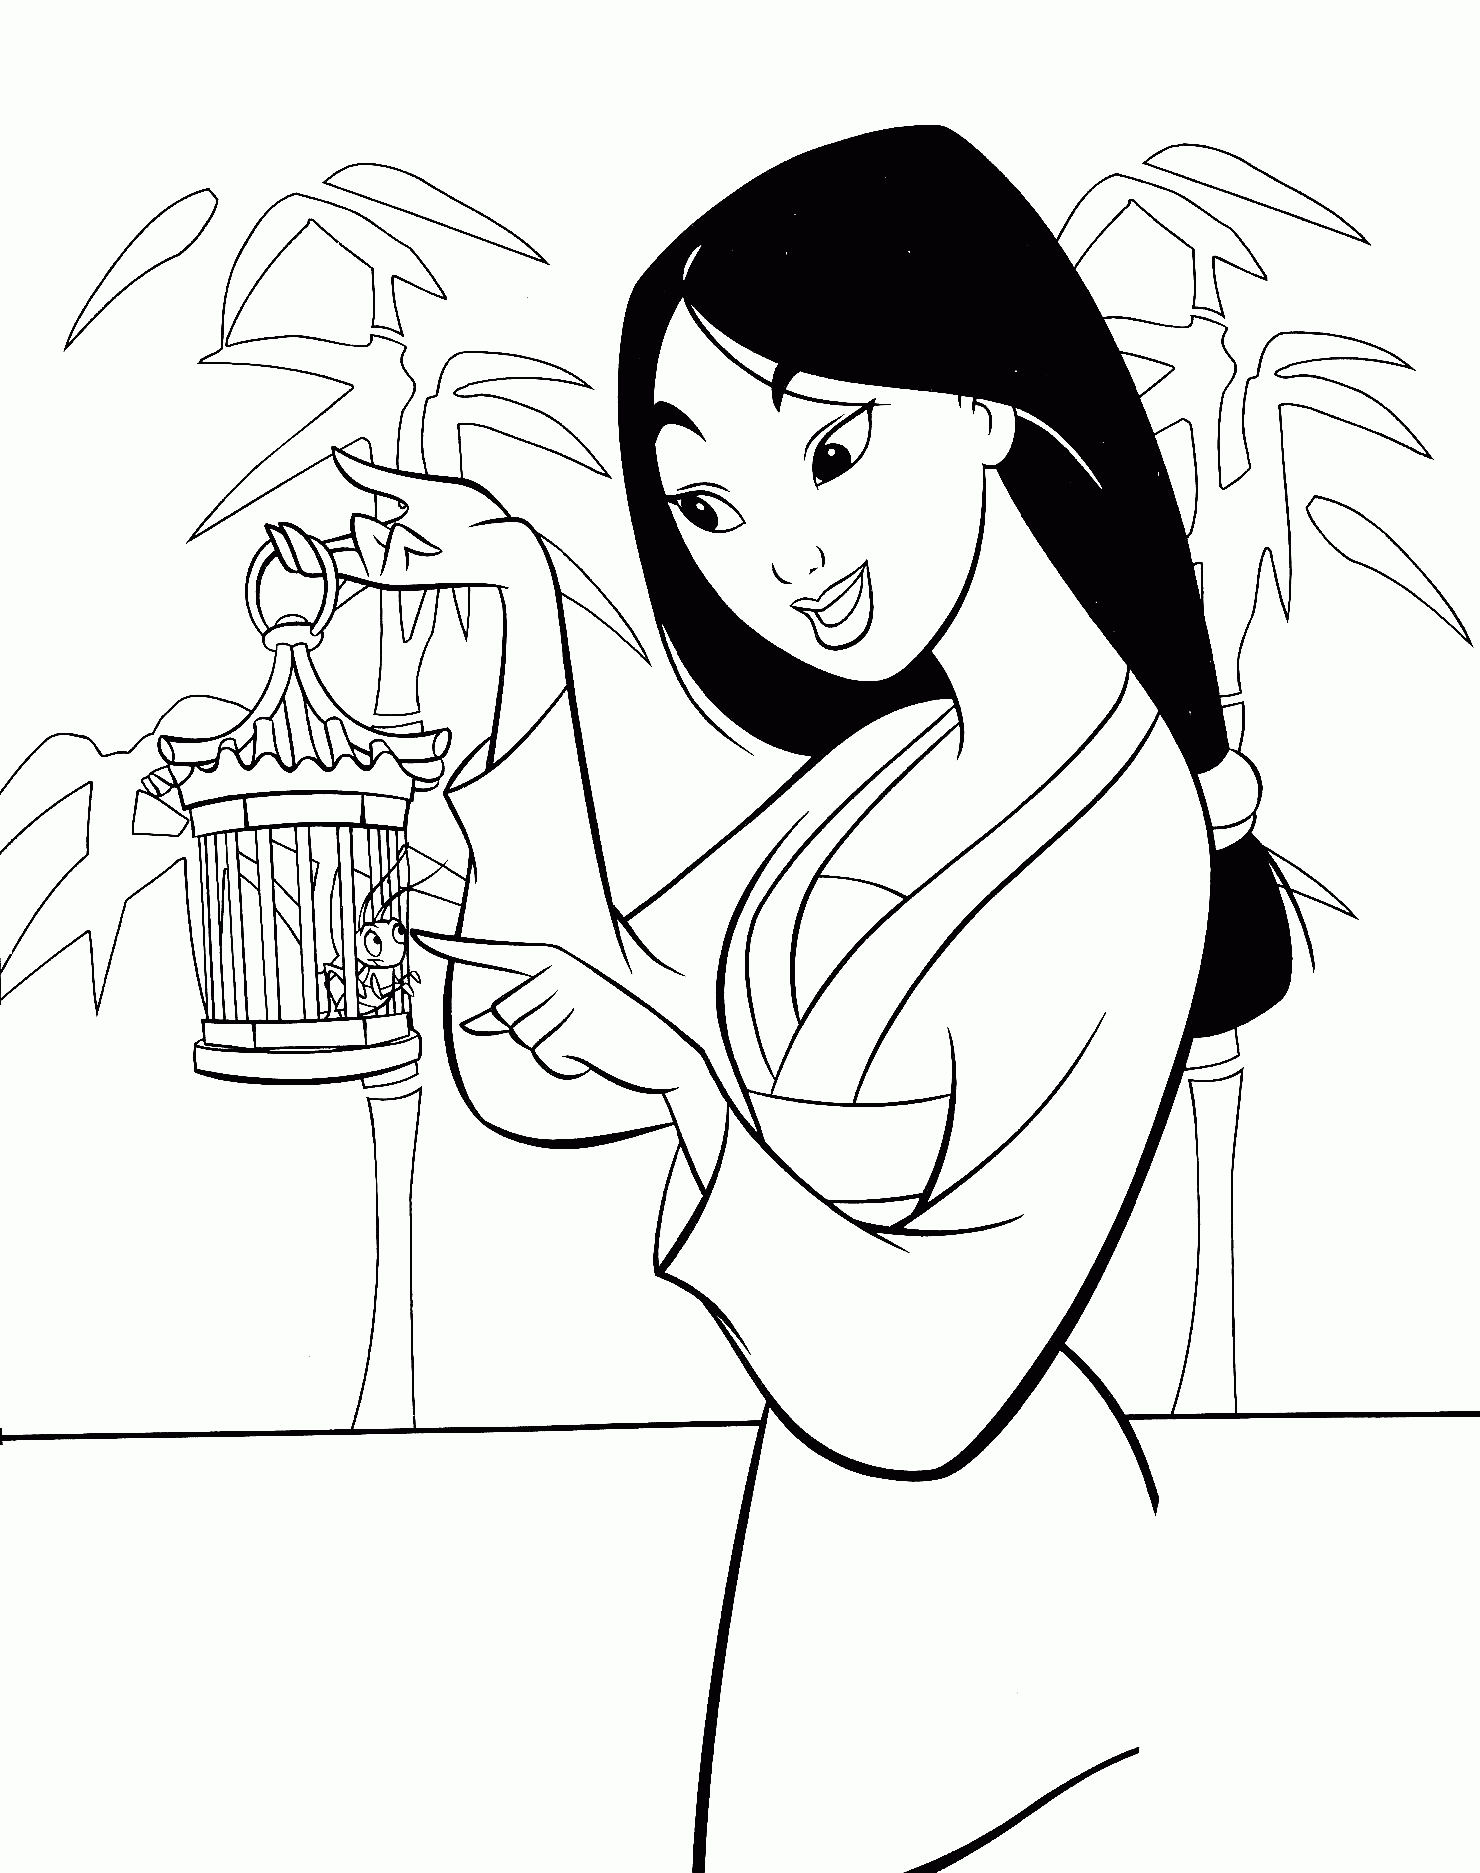 Mulan Free Coloring Pages - Coloring Home